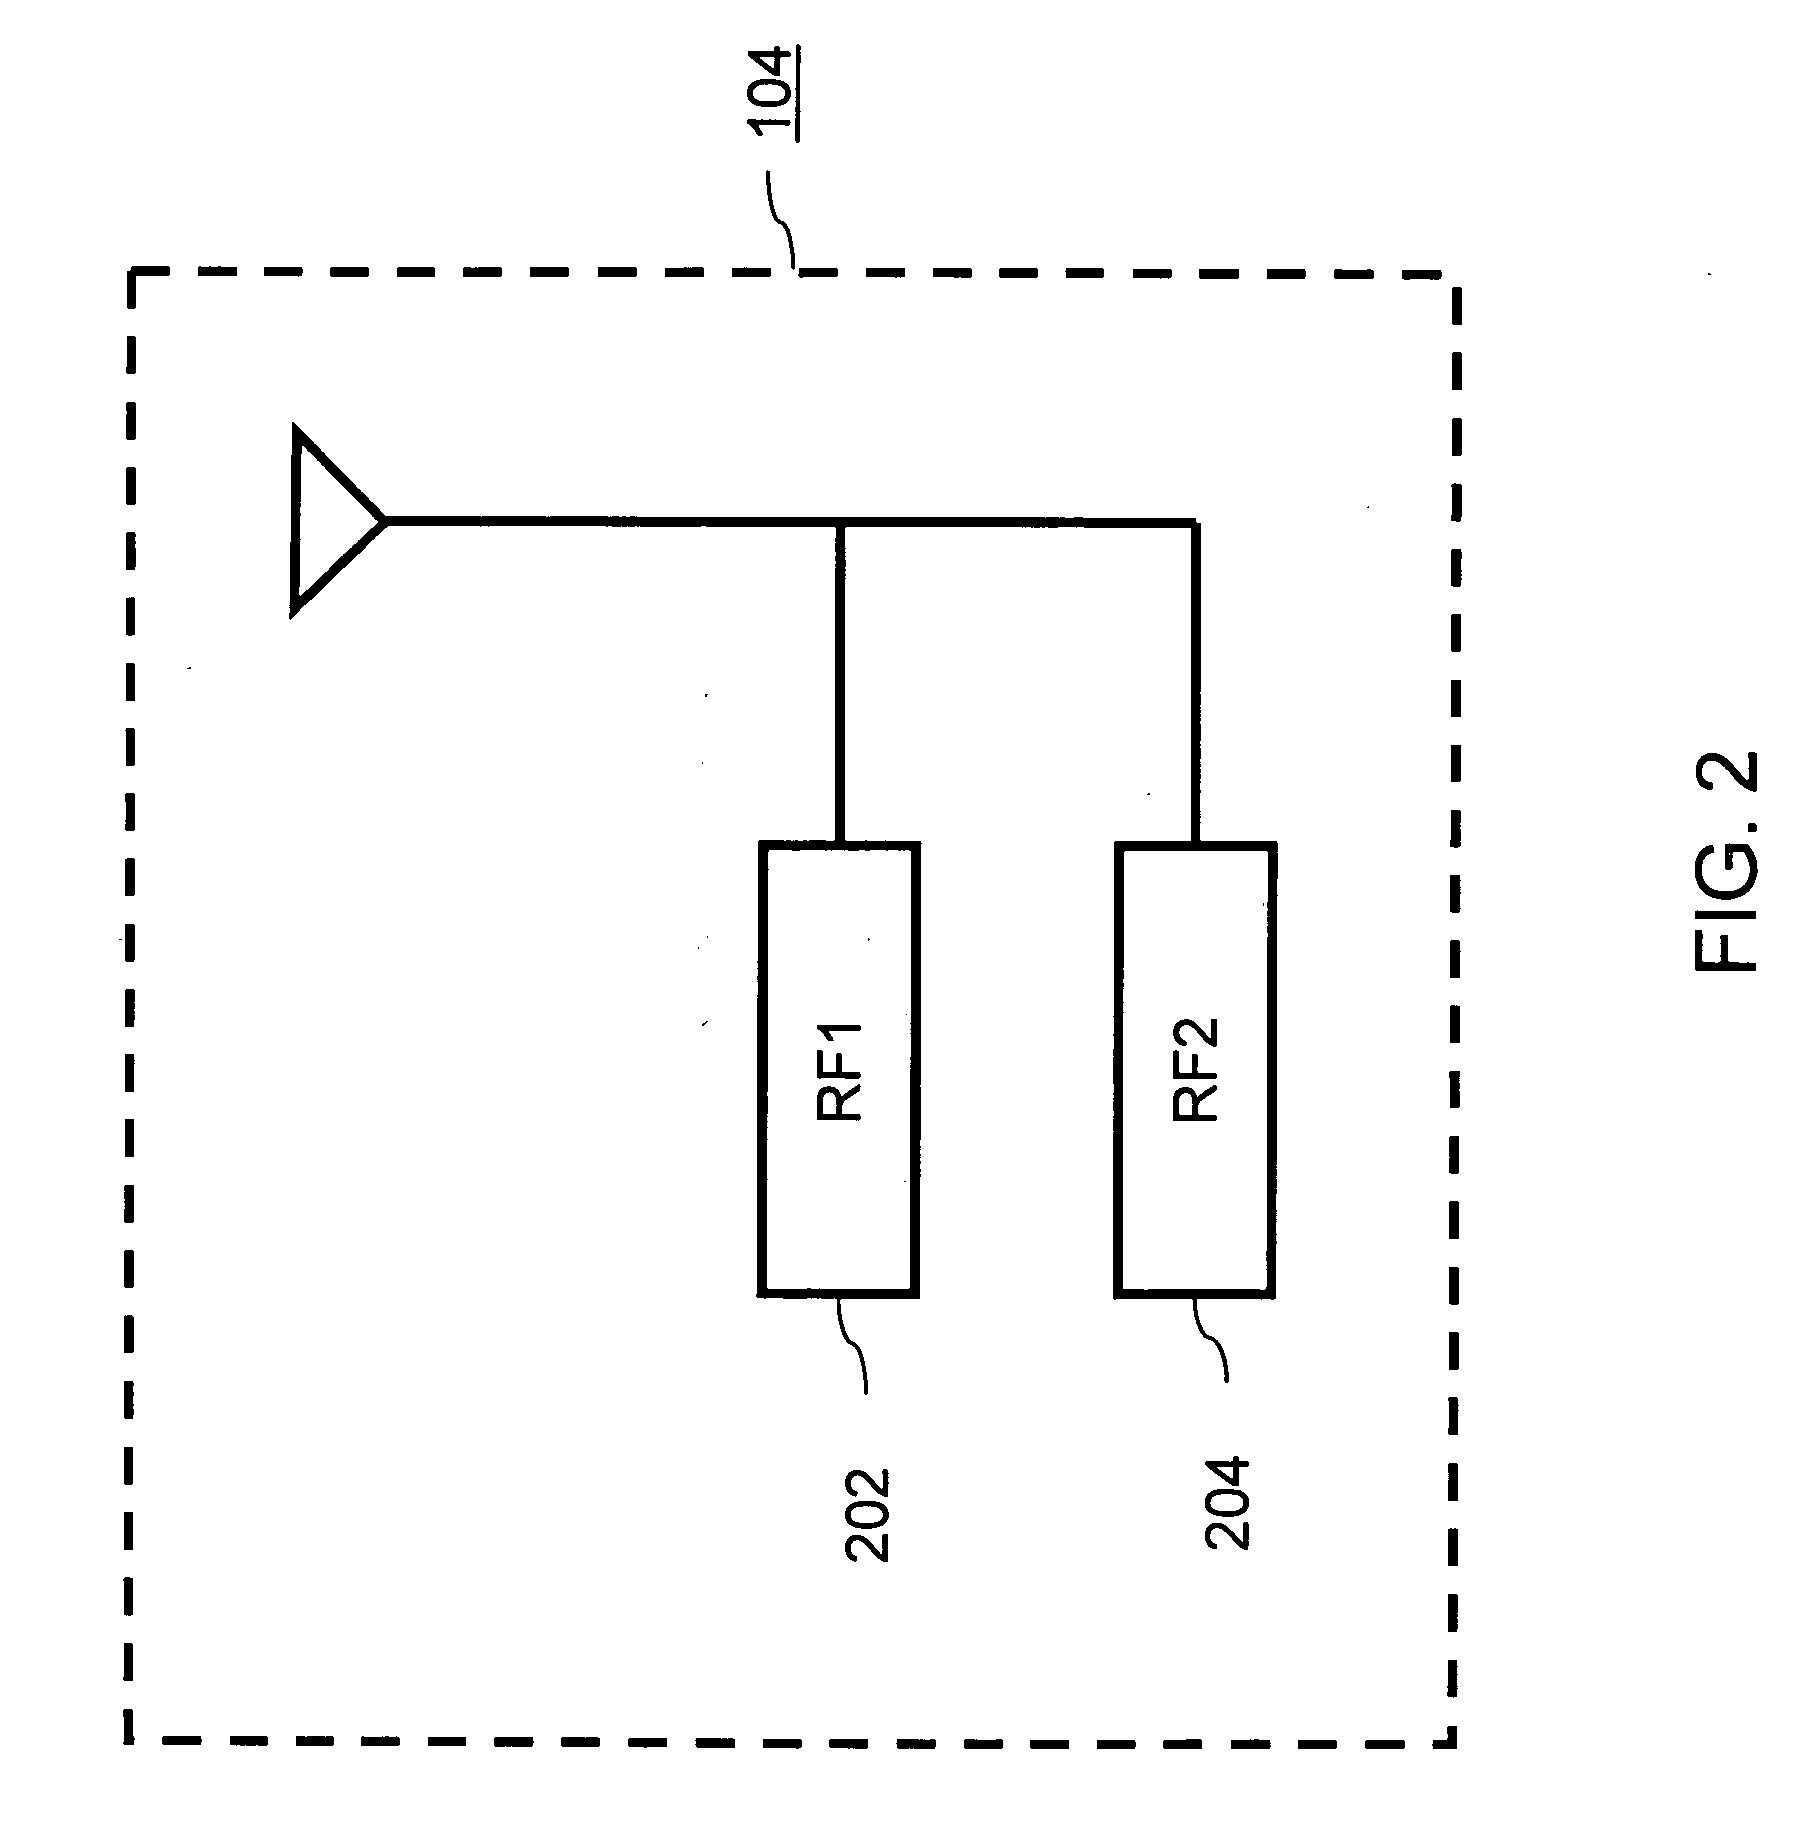 Method and system for channel assignment of OFDM channels